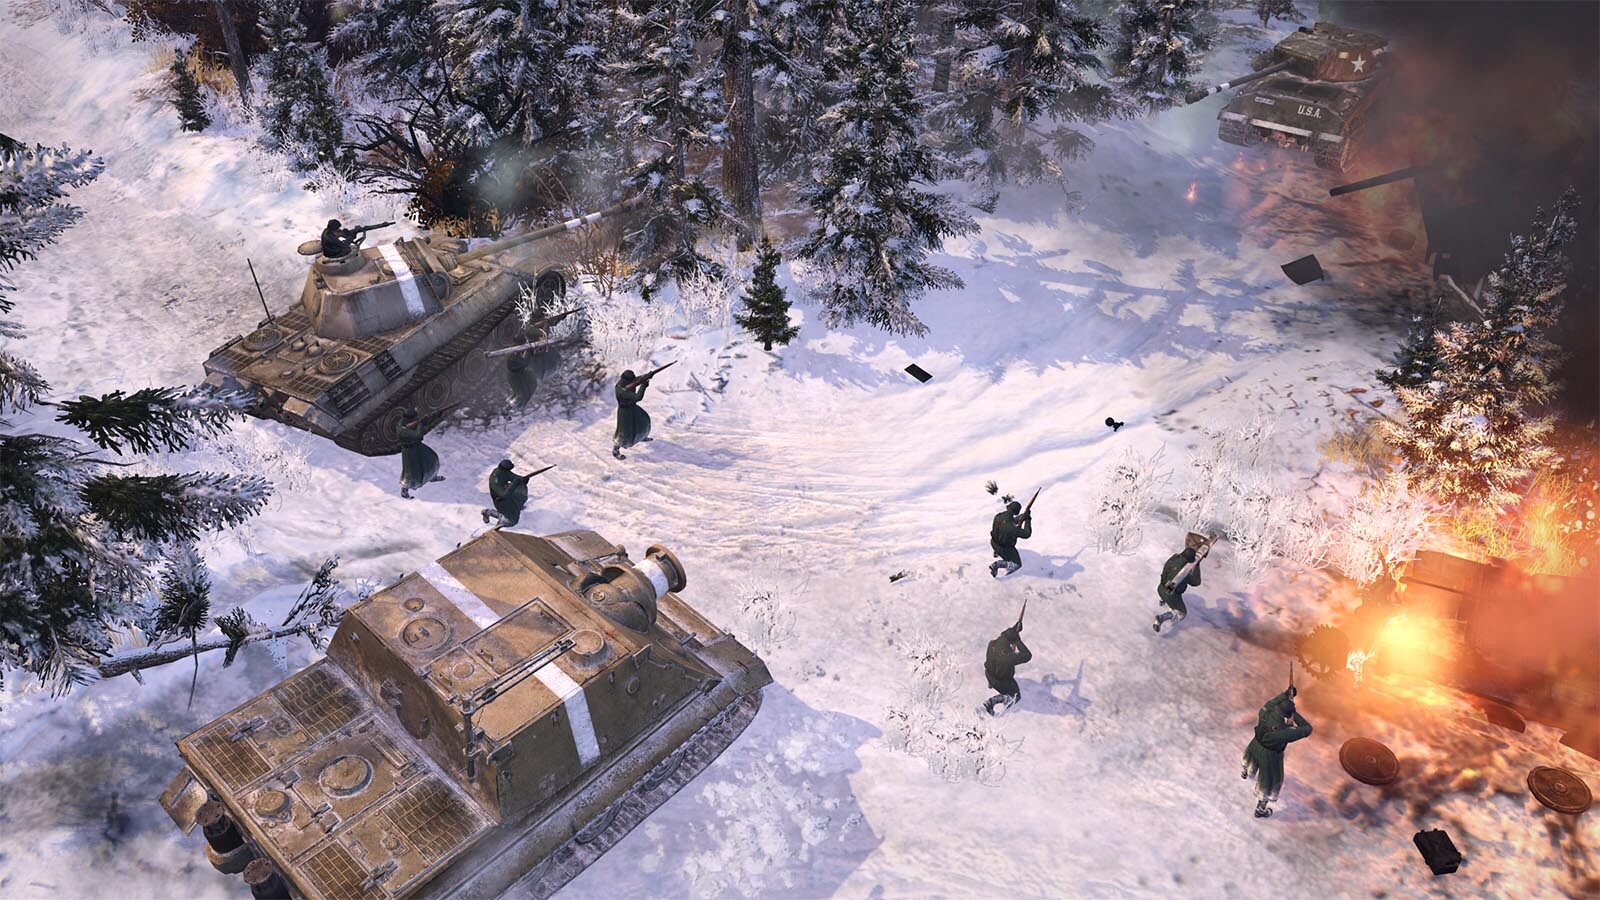 best mode of company of heroes